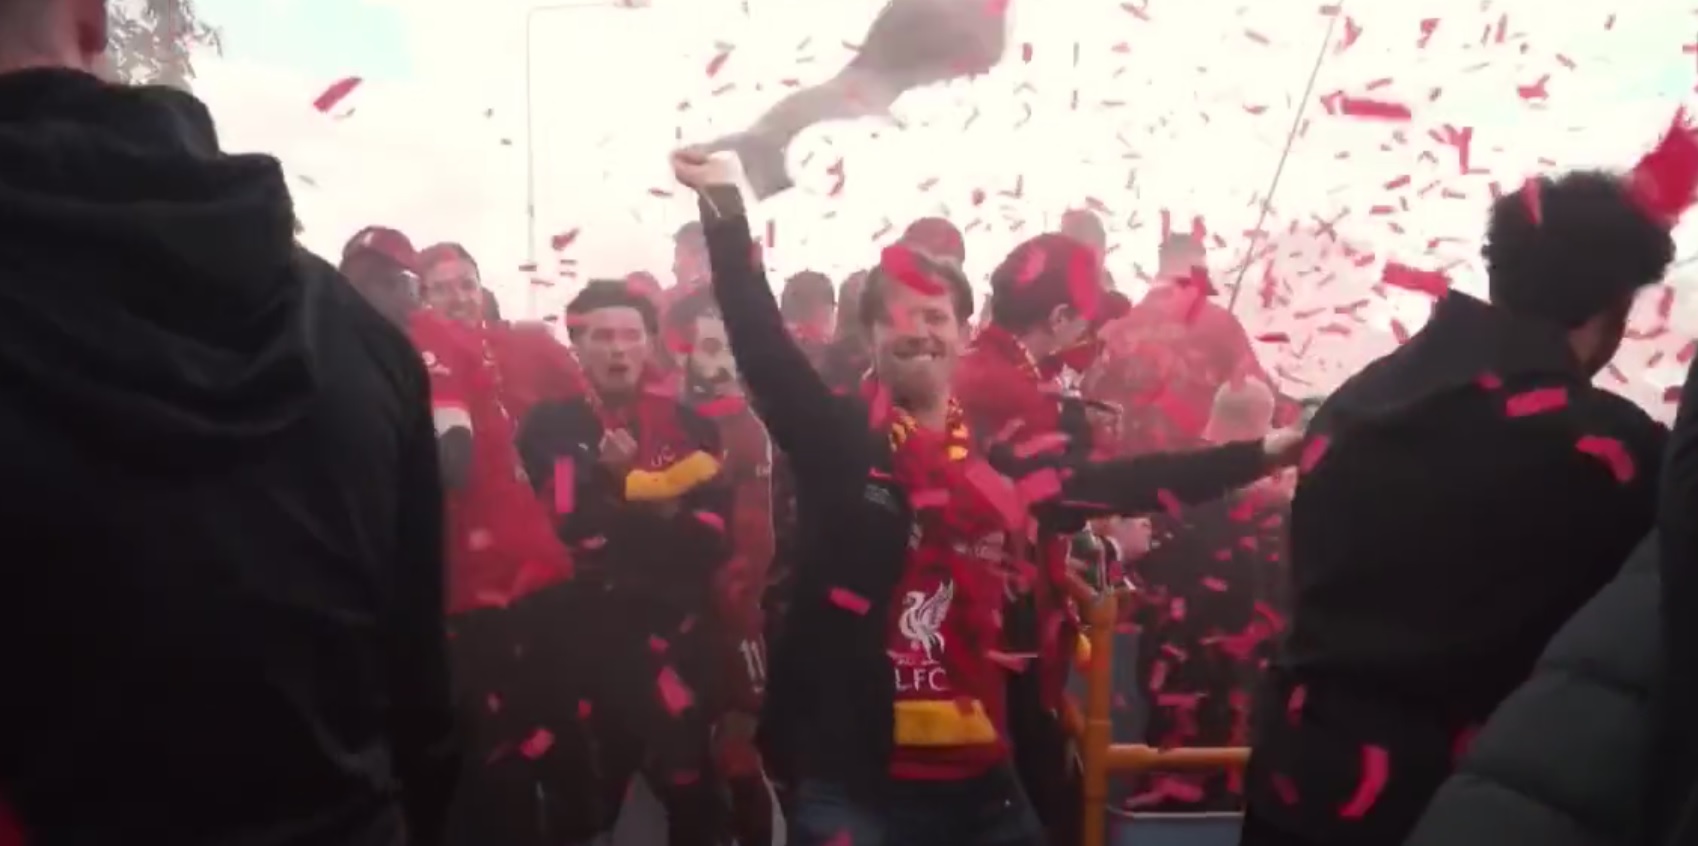 (Video) Michael Edwards spotted partying hard on Liverpool’s trophy bus in scenes fans will love